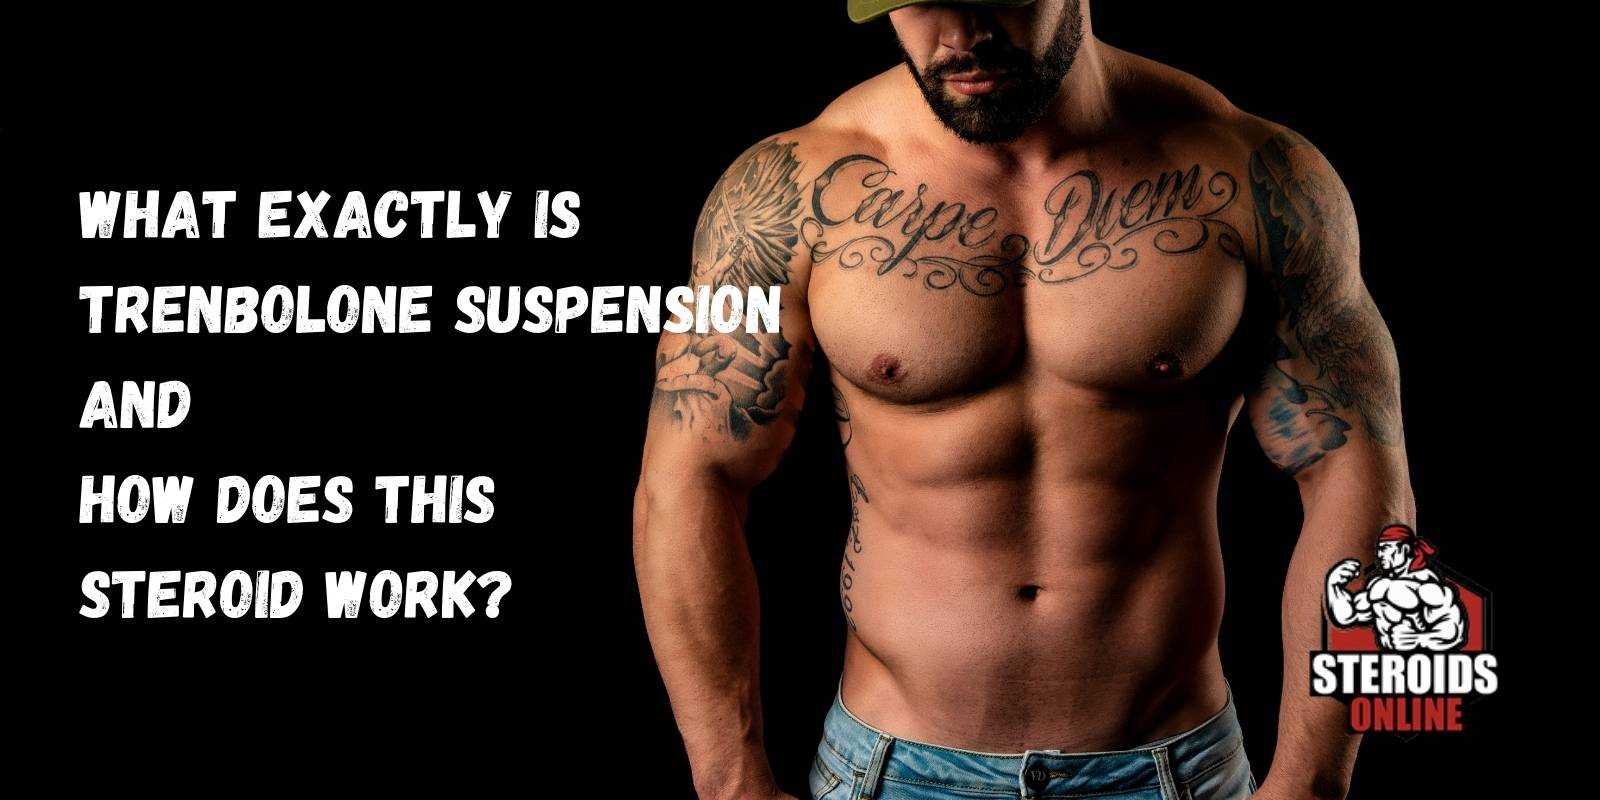 What Exactly is Trenbolone Suspension and How Does this Steroid Work?